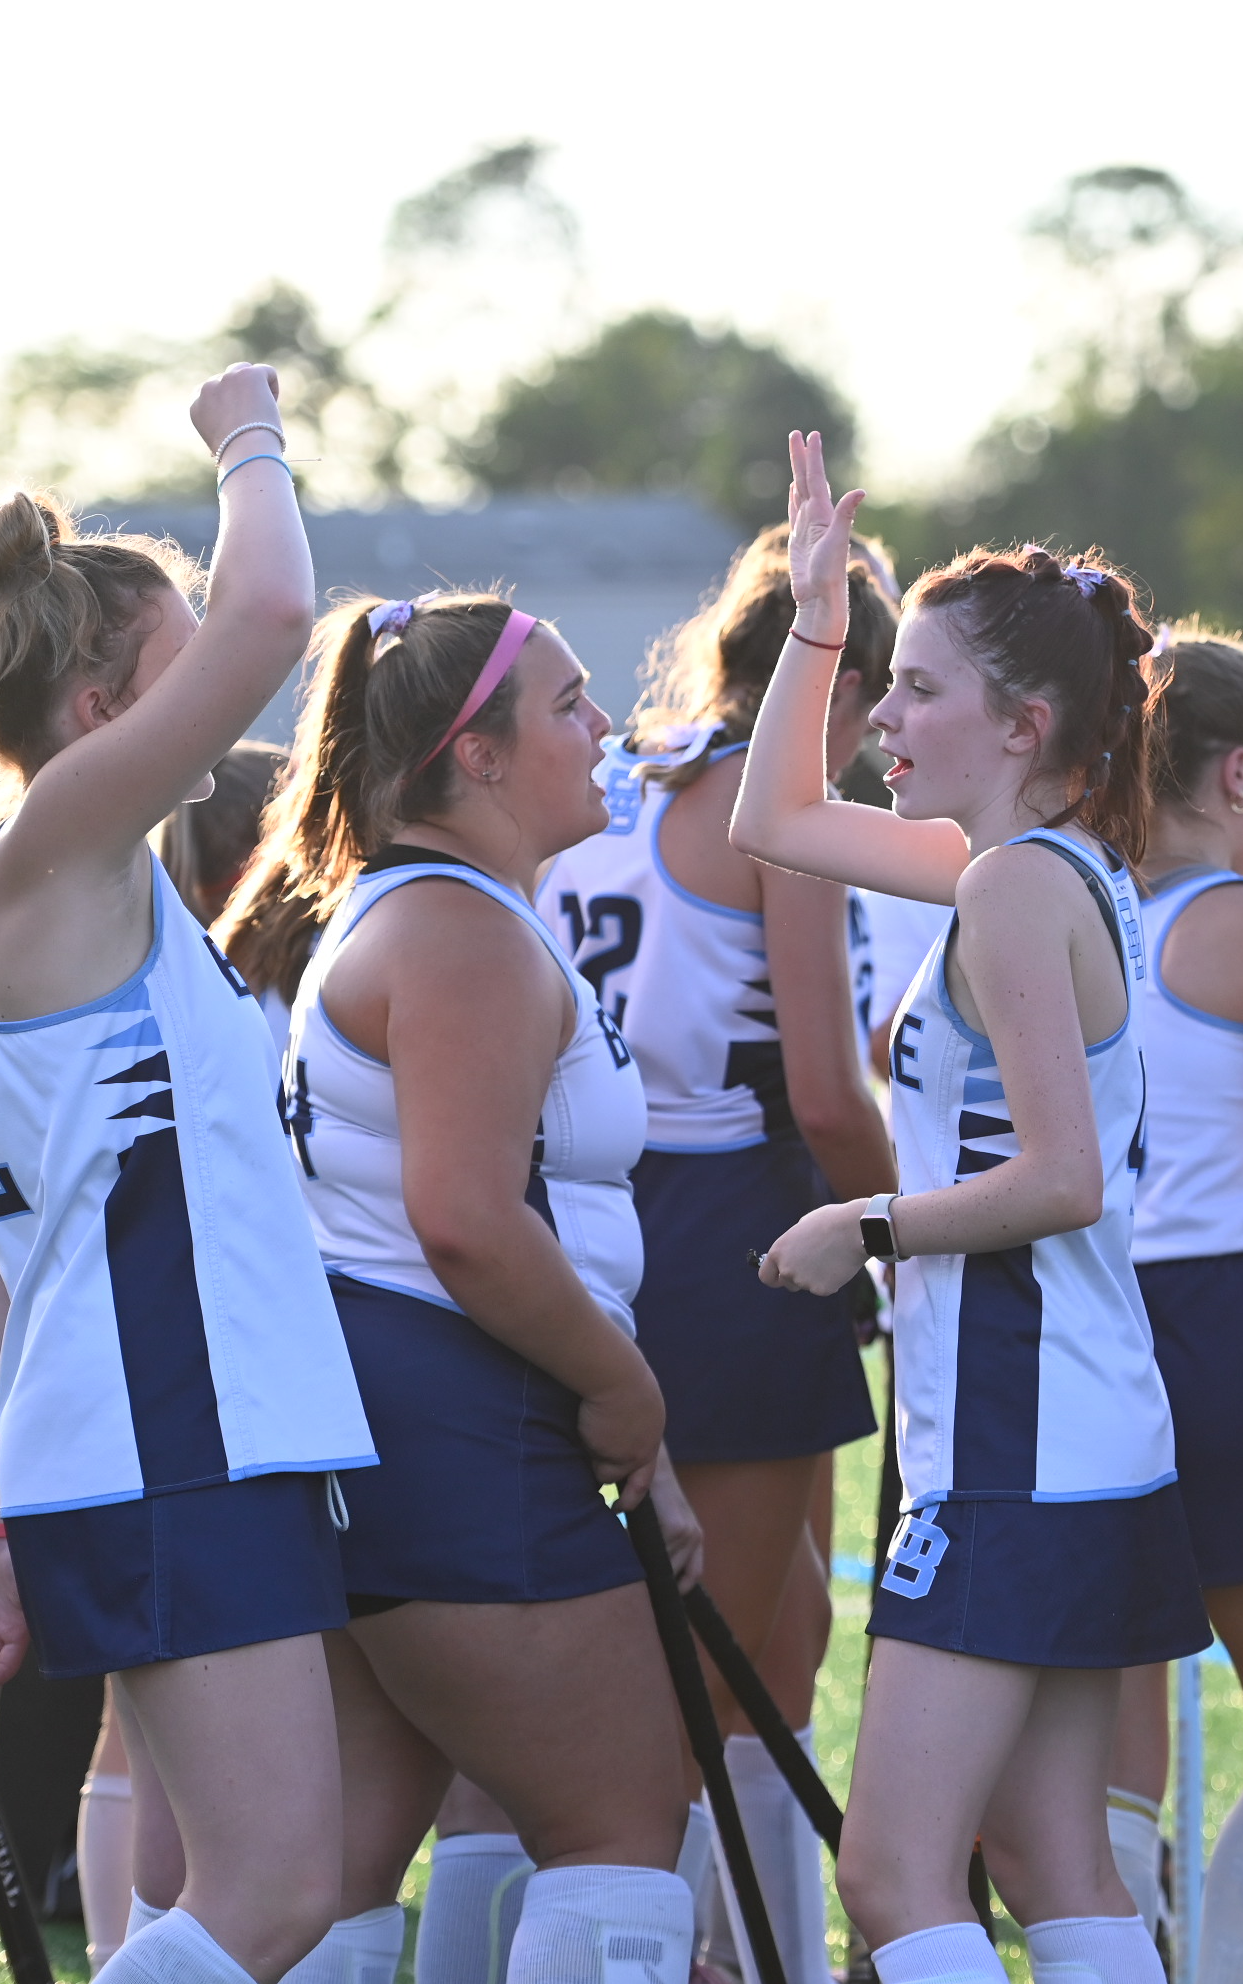 Daniel Boone Field Hockey players high-fiving each other after a game